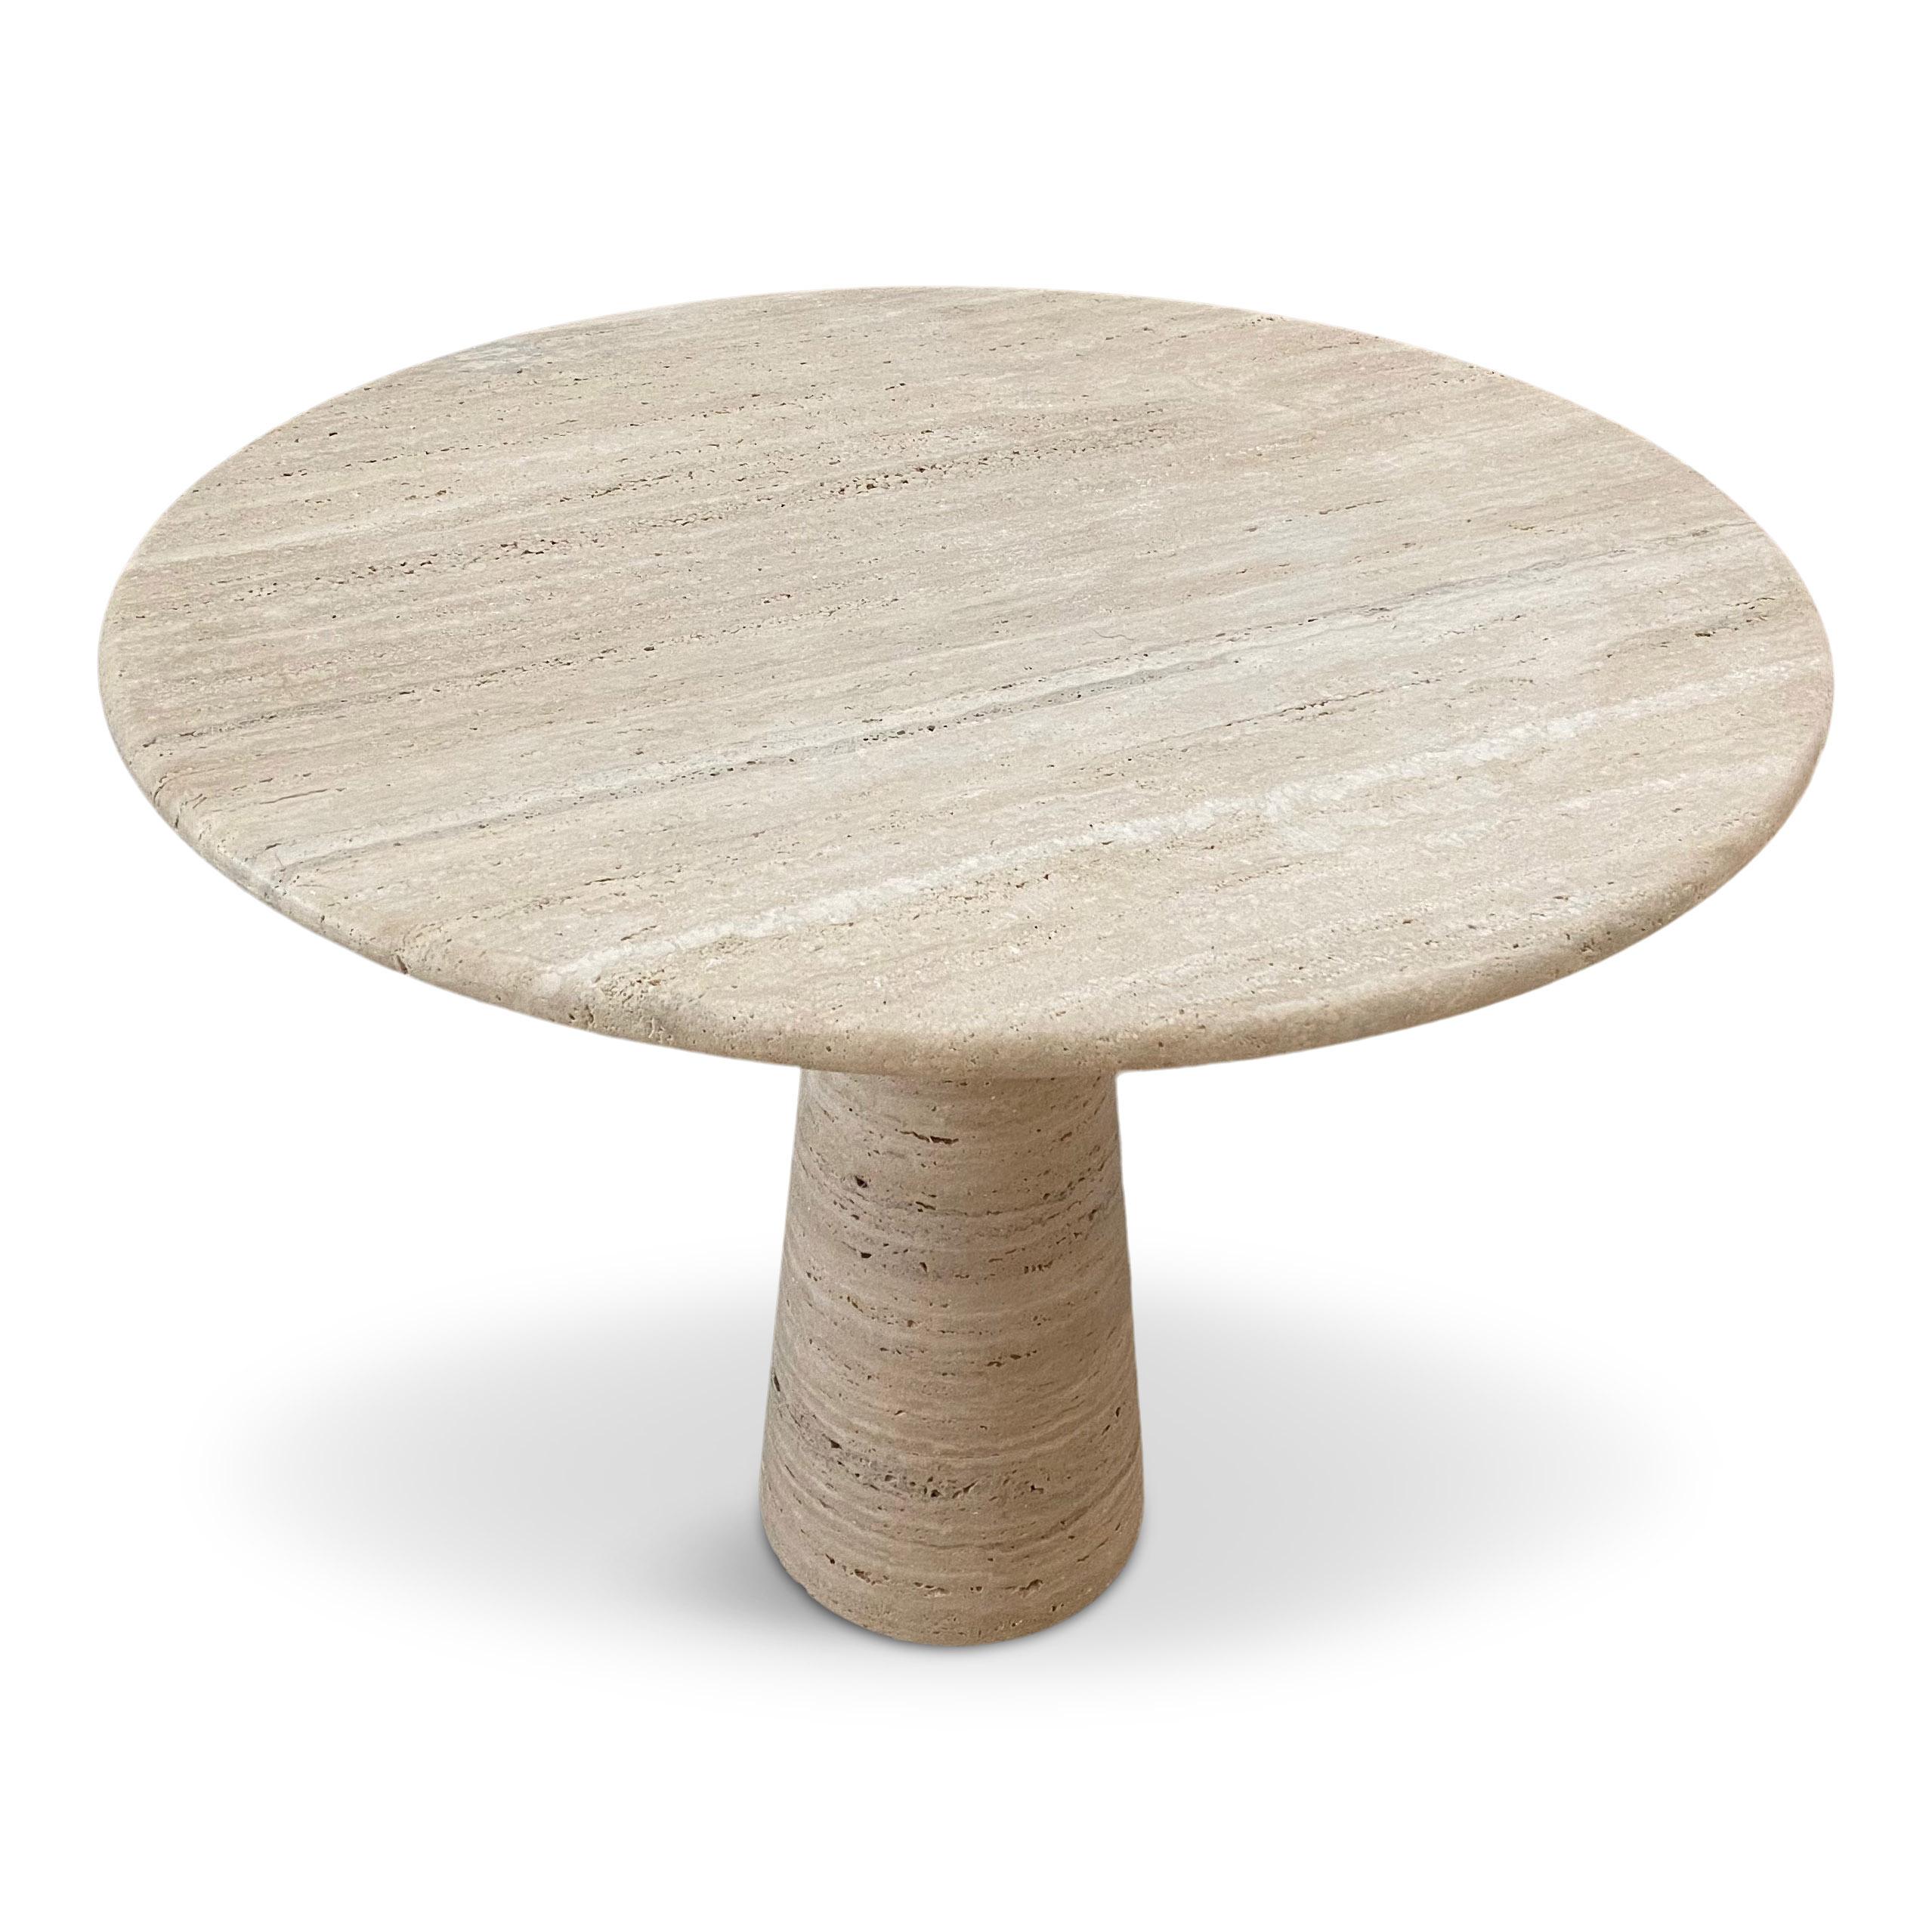 Bespoke Round Italian Travertine Dining Table For Sale 3